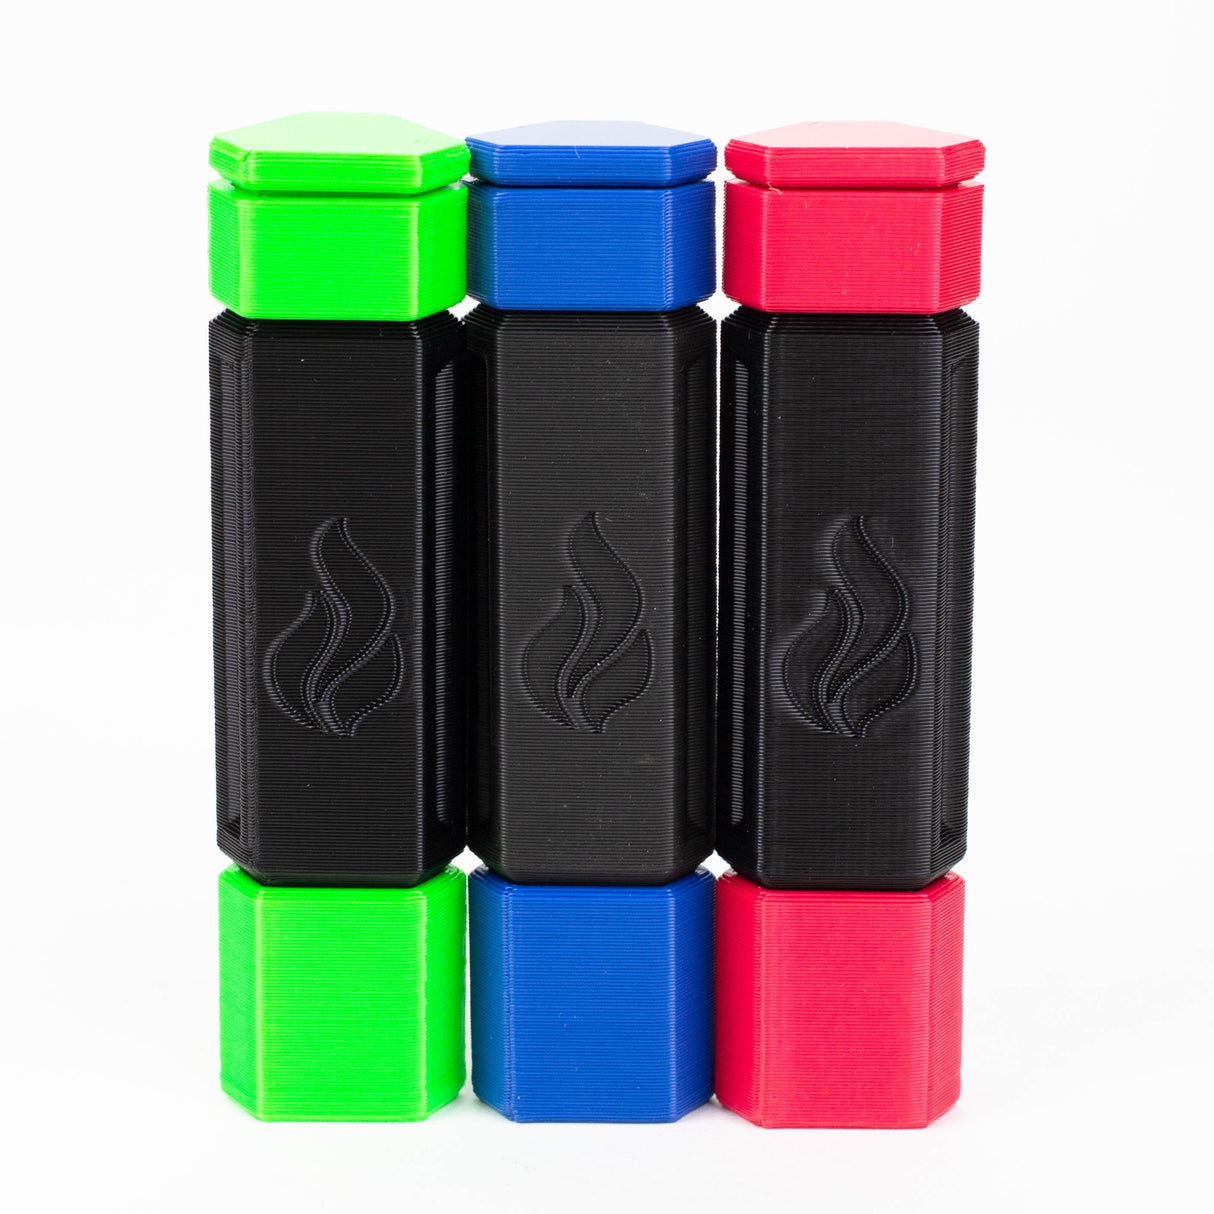 CONE CRUSHER MICRO (FILLS 3 PRE-ROLLED CONES)-Assorted color